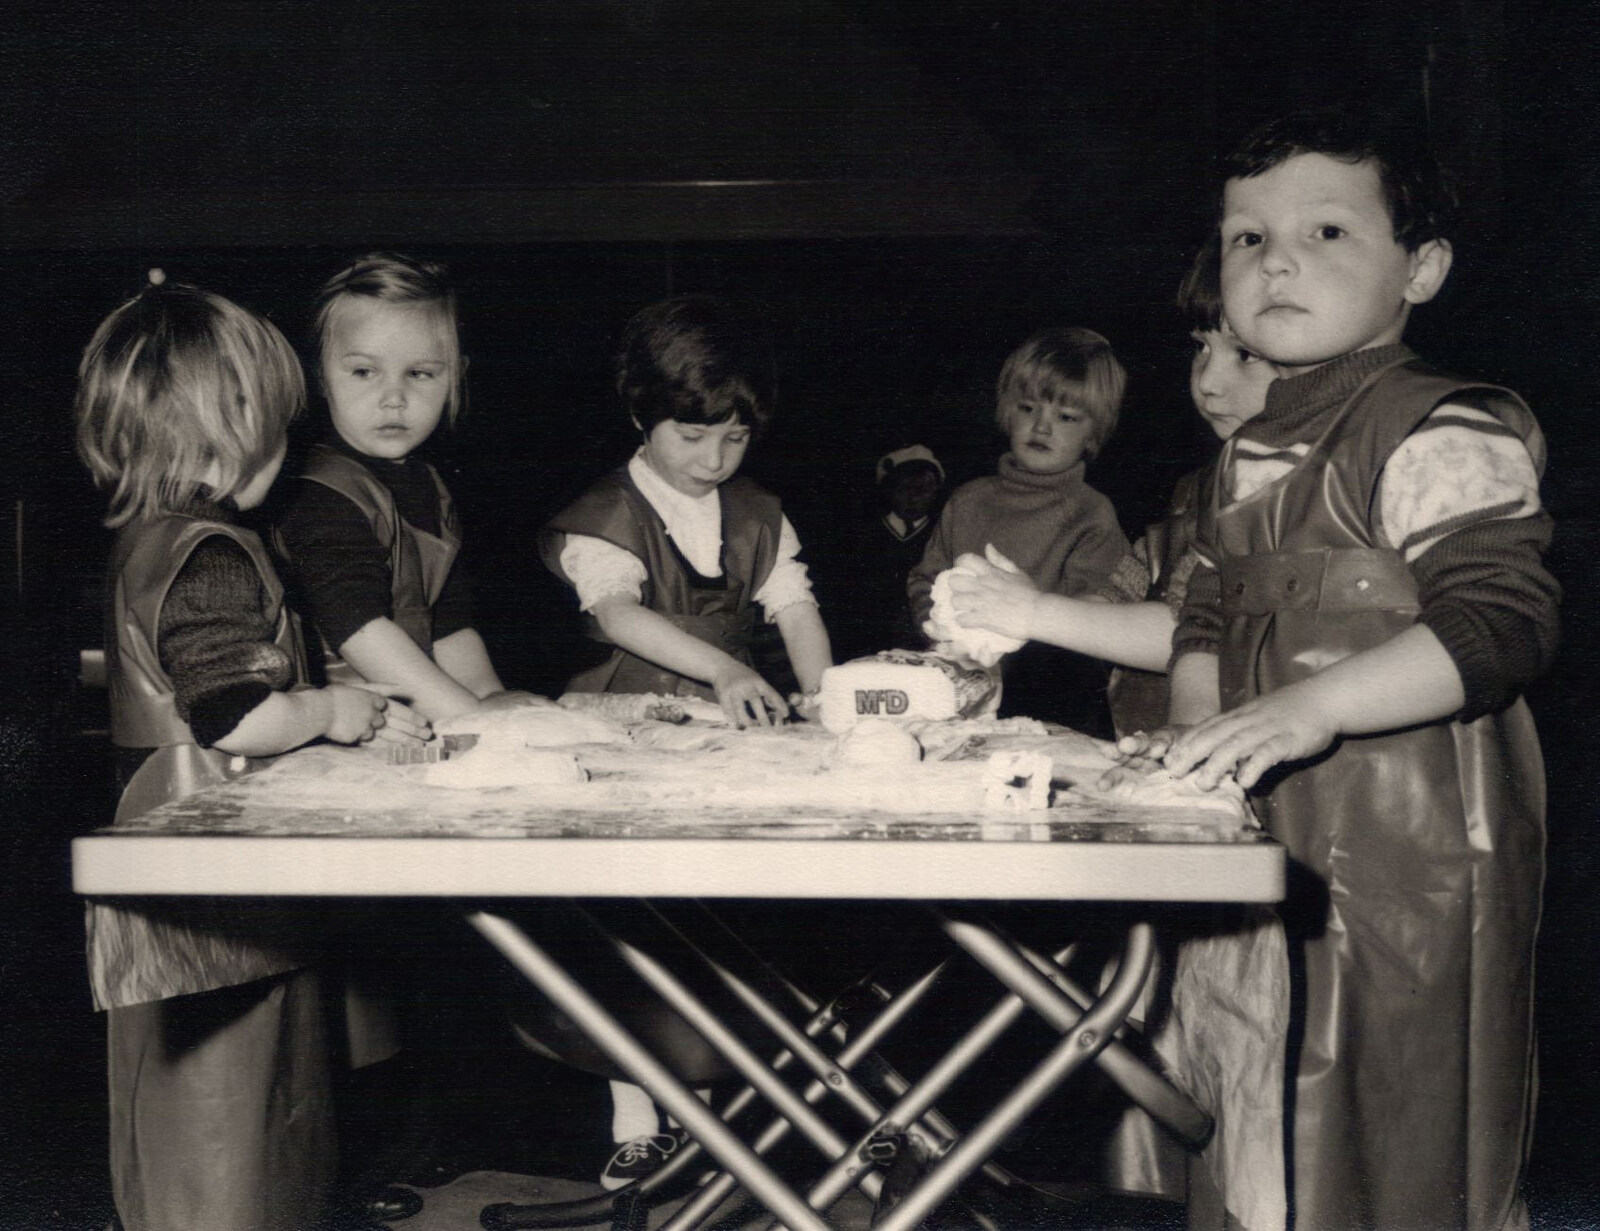 Family History: The 1970s, Timperley and Sandbach, Cheshire - 24th January 2020: At play school - of the crowd, but not of the crowd, 1971/2